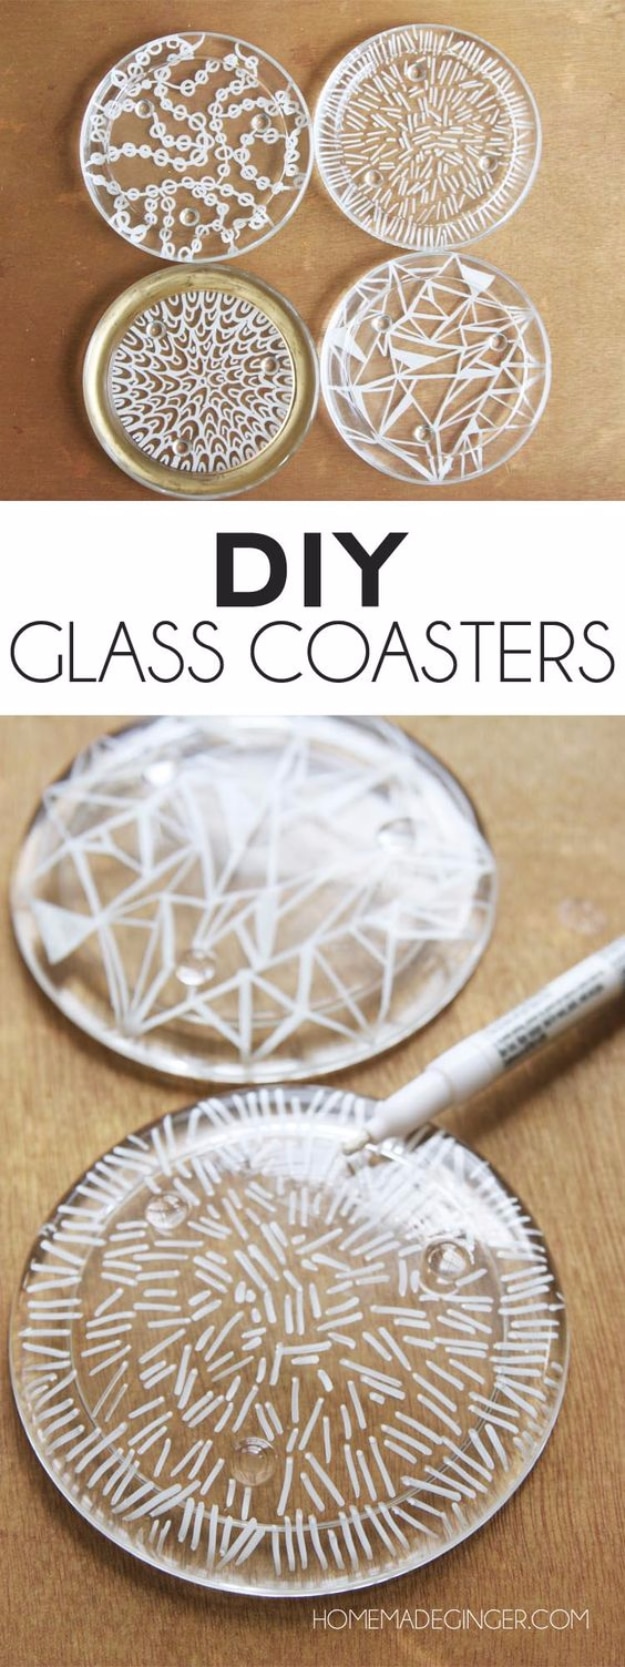 DIY Coasters - DIY Glass Coasters - Best Quick DIY Gifts and Home Decor - Easy Step by Step Tutorials for DIY Coaster Projects - Mod Podge, Tile, Painted, Photo and Sewing Projects - Cool Christmas Presents for Him and Her - DIY Projects and Crafts by DIY Joy 